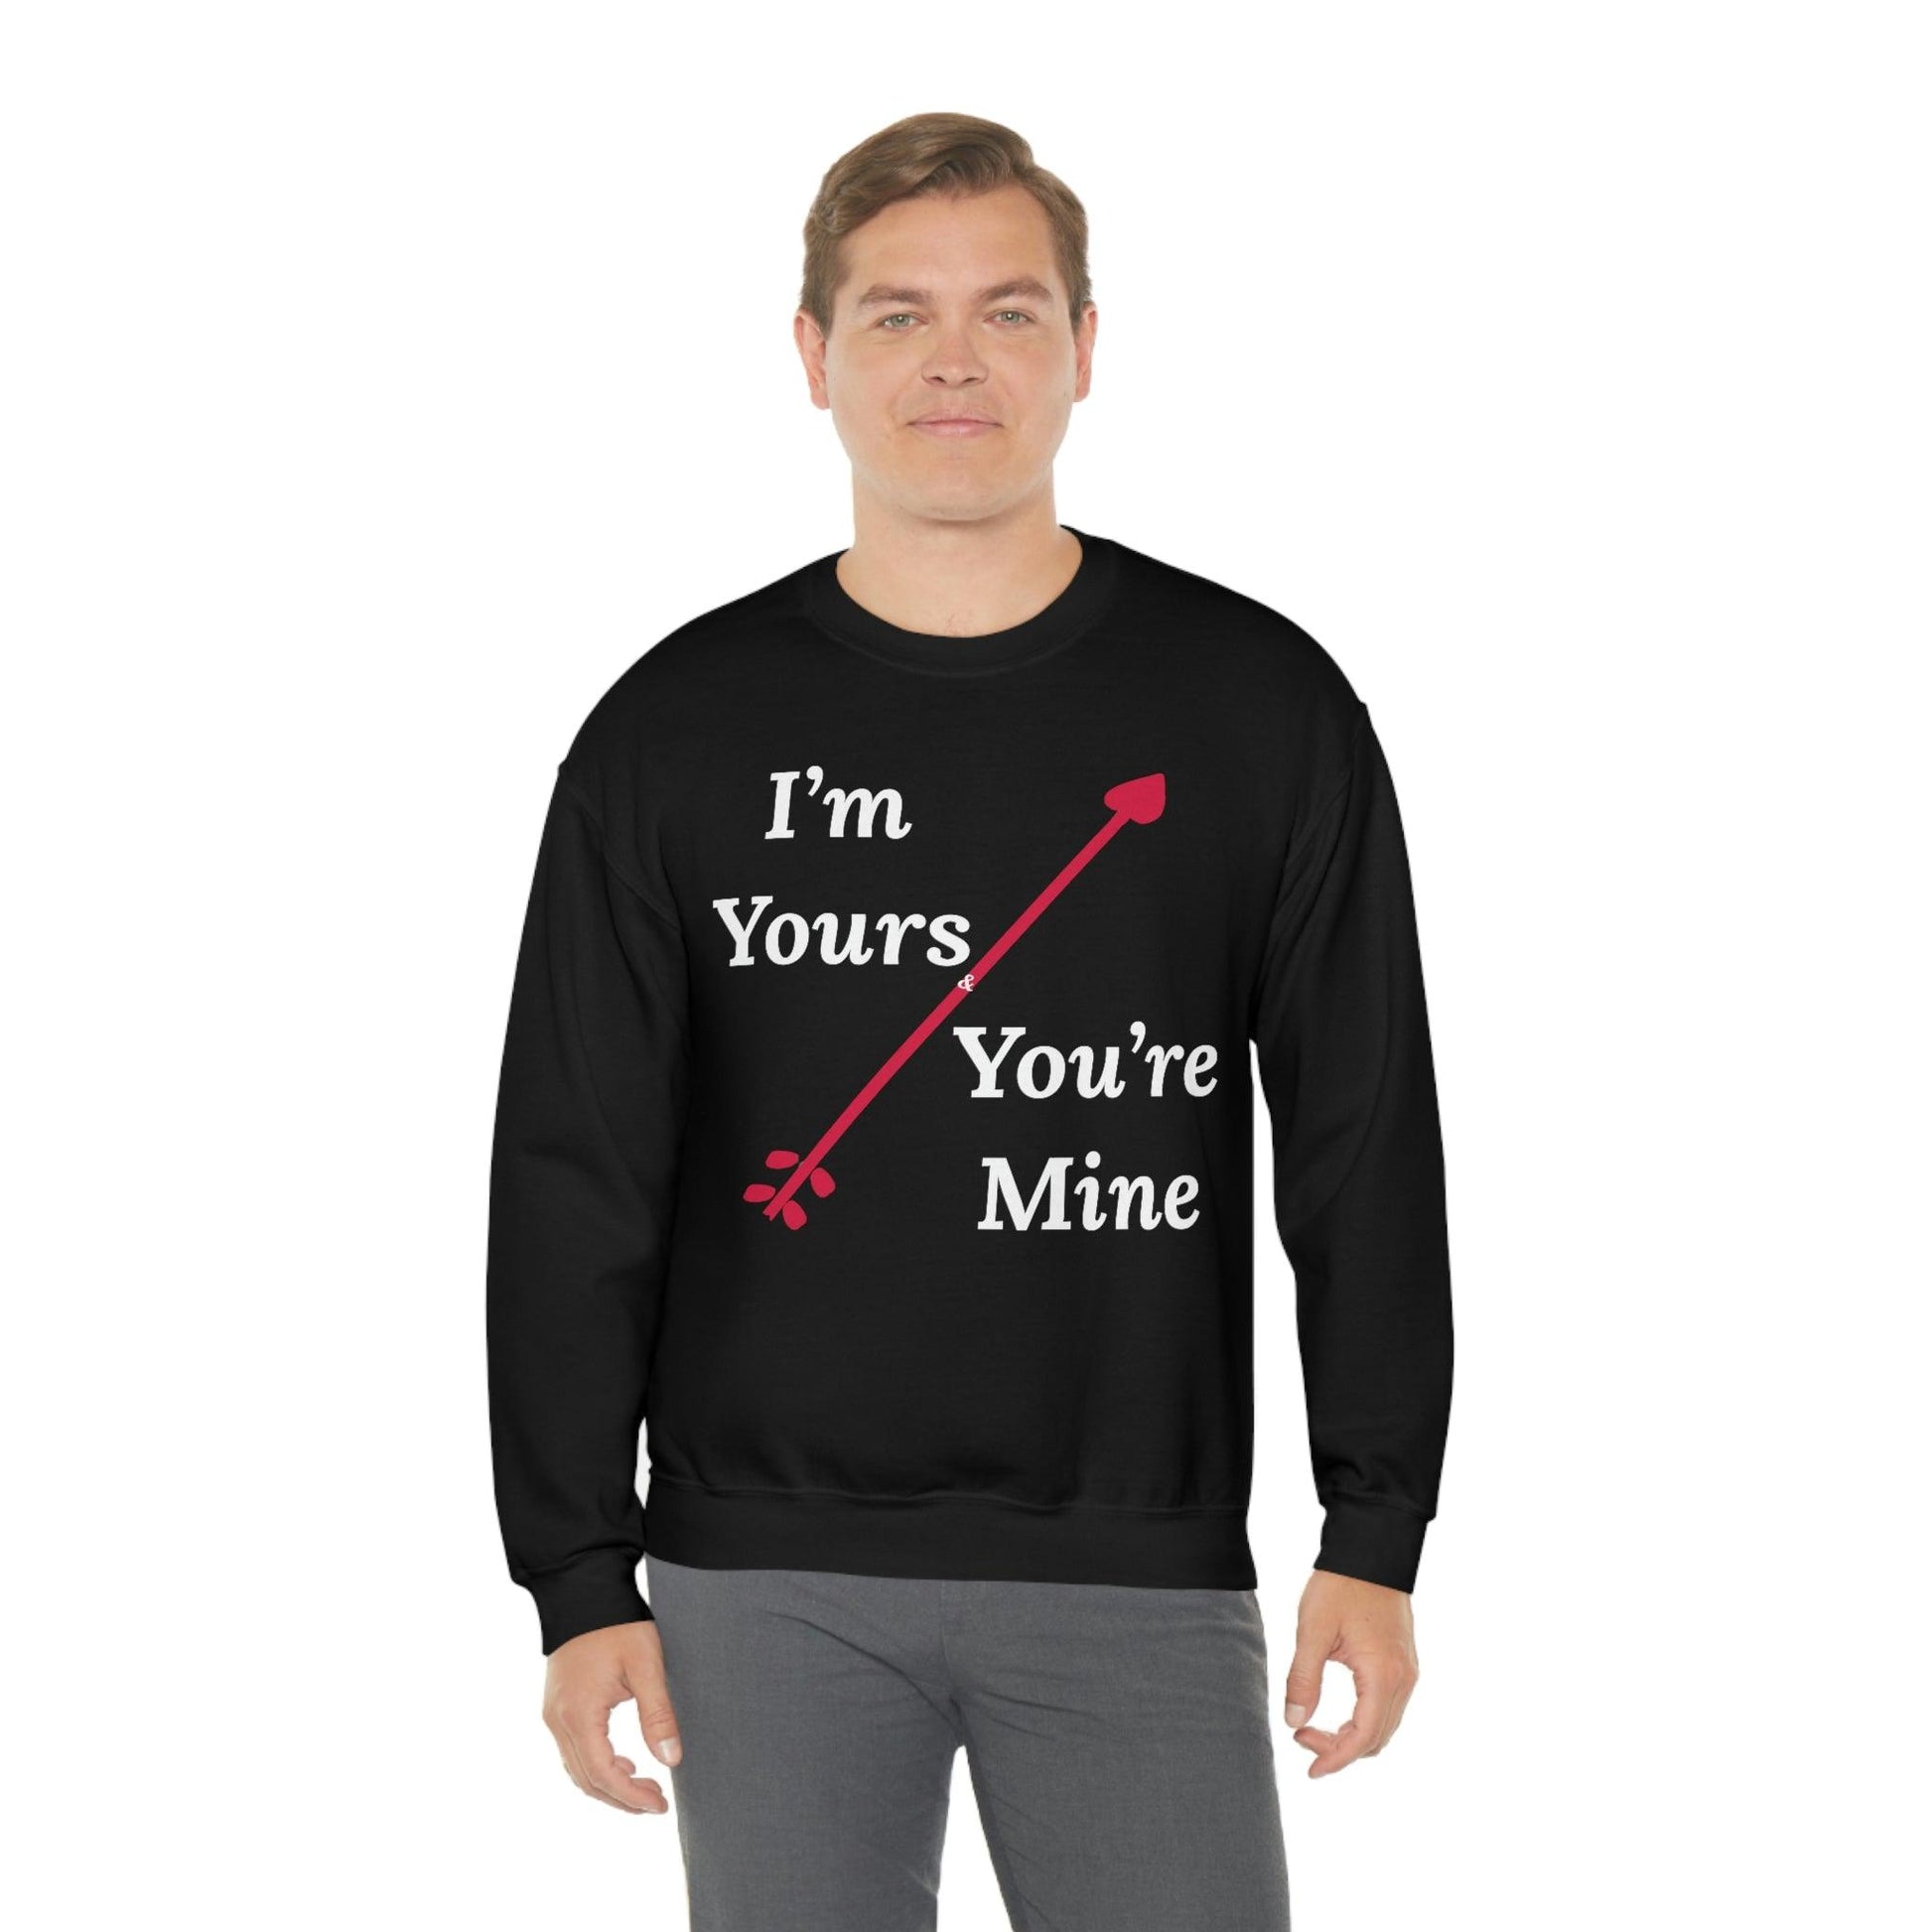 I'm Yours and You're Mine Sweatshirt - Giftsmojo